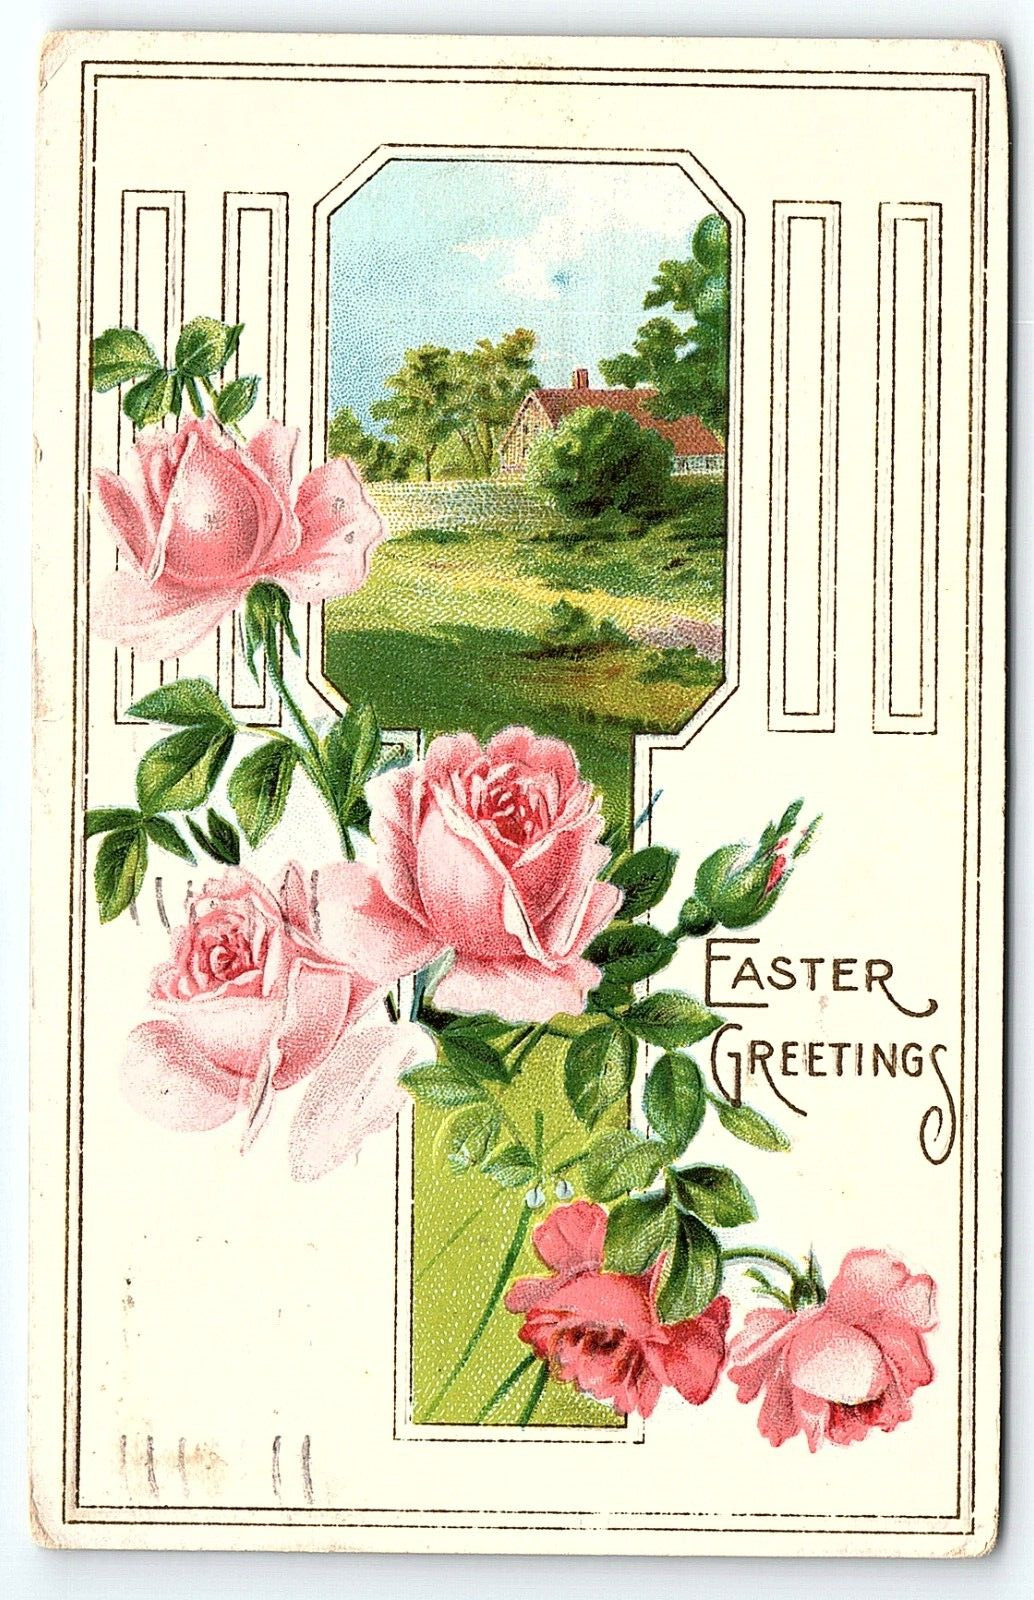 c1910 EASTER GREETINGS ROSES SECNIC VIEW ROCHESTER NY EMBOSSED POSTCARD P3338